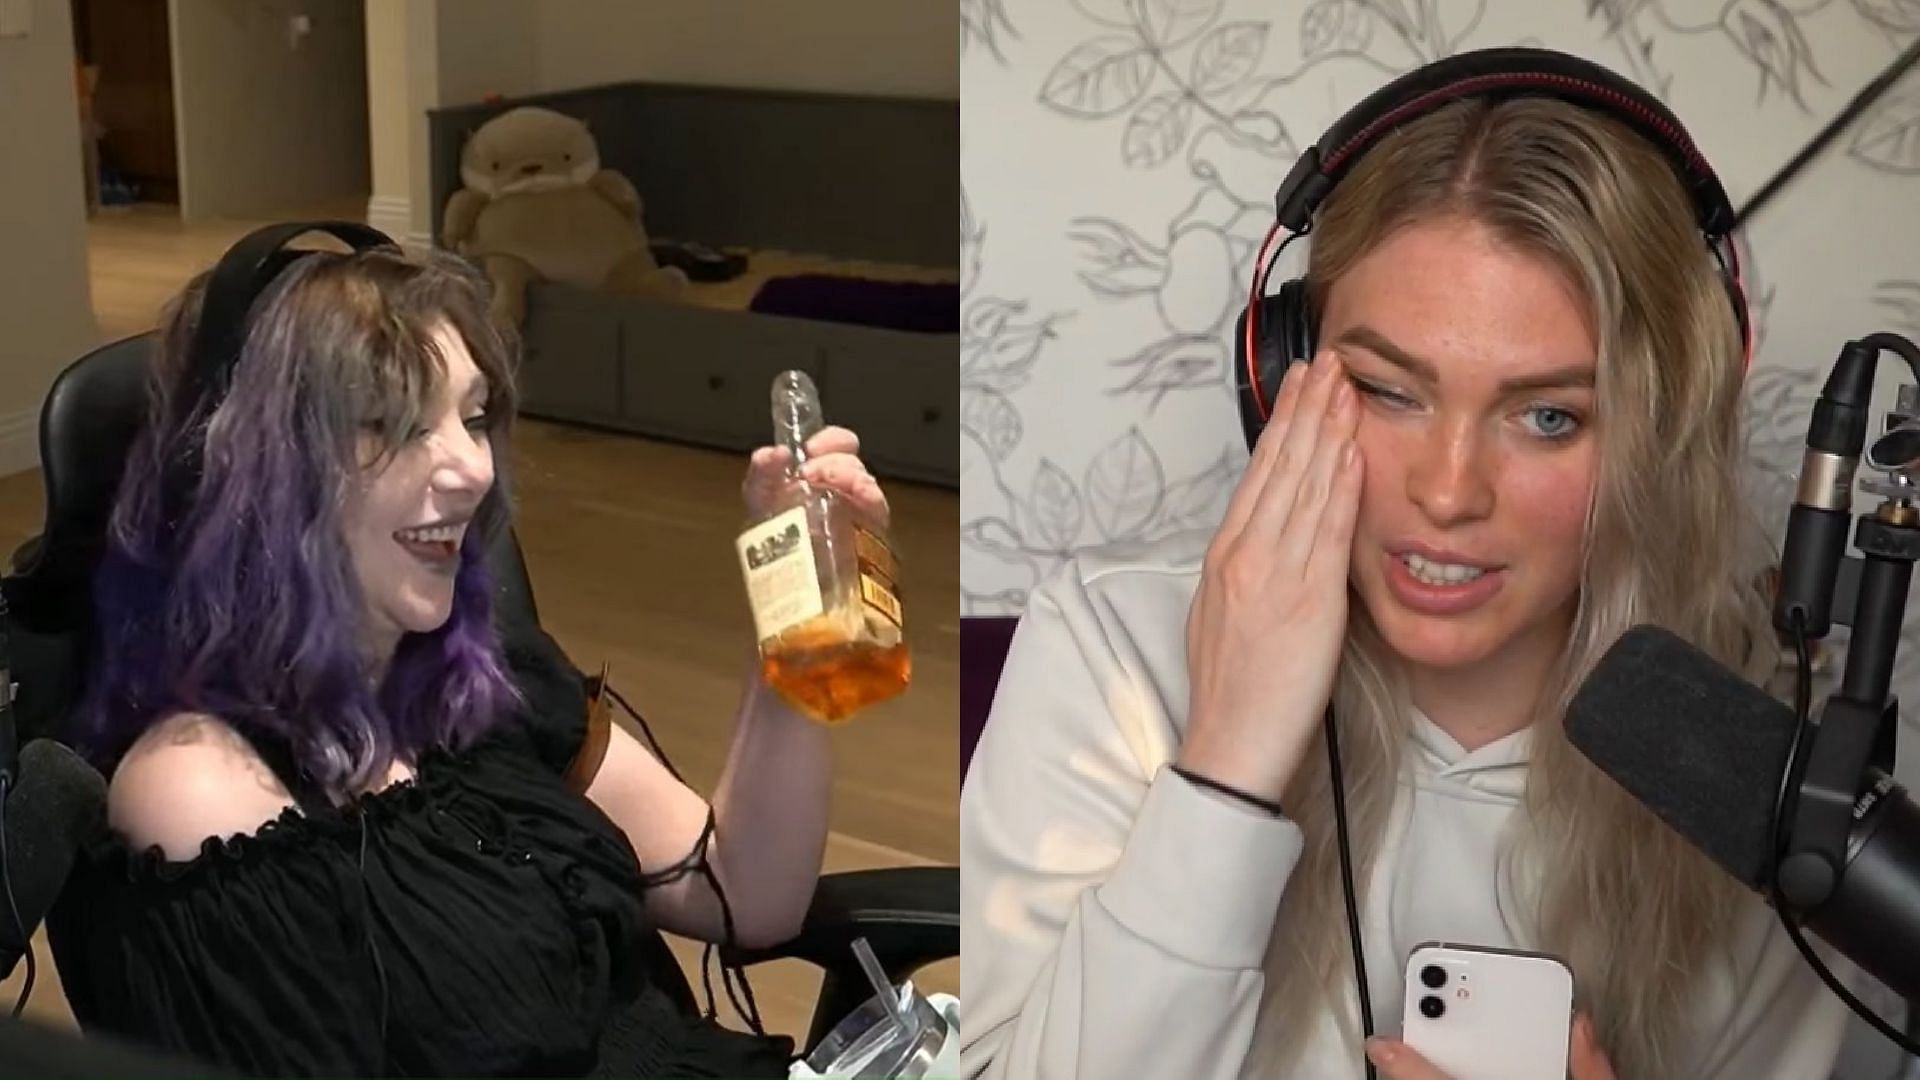 Justaminx Trashed Award Party - Streamers React - Minx Reacts